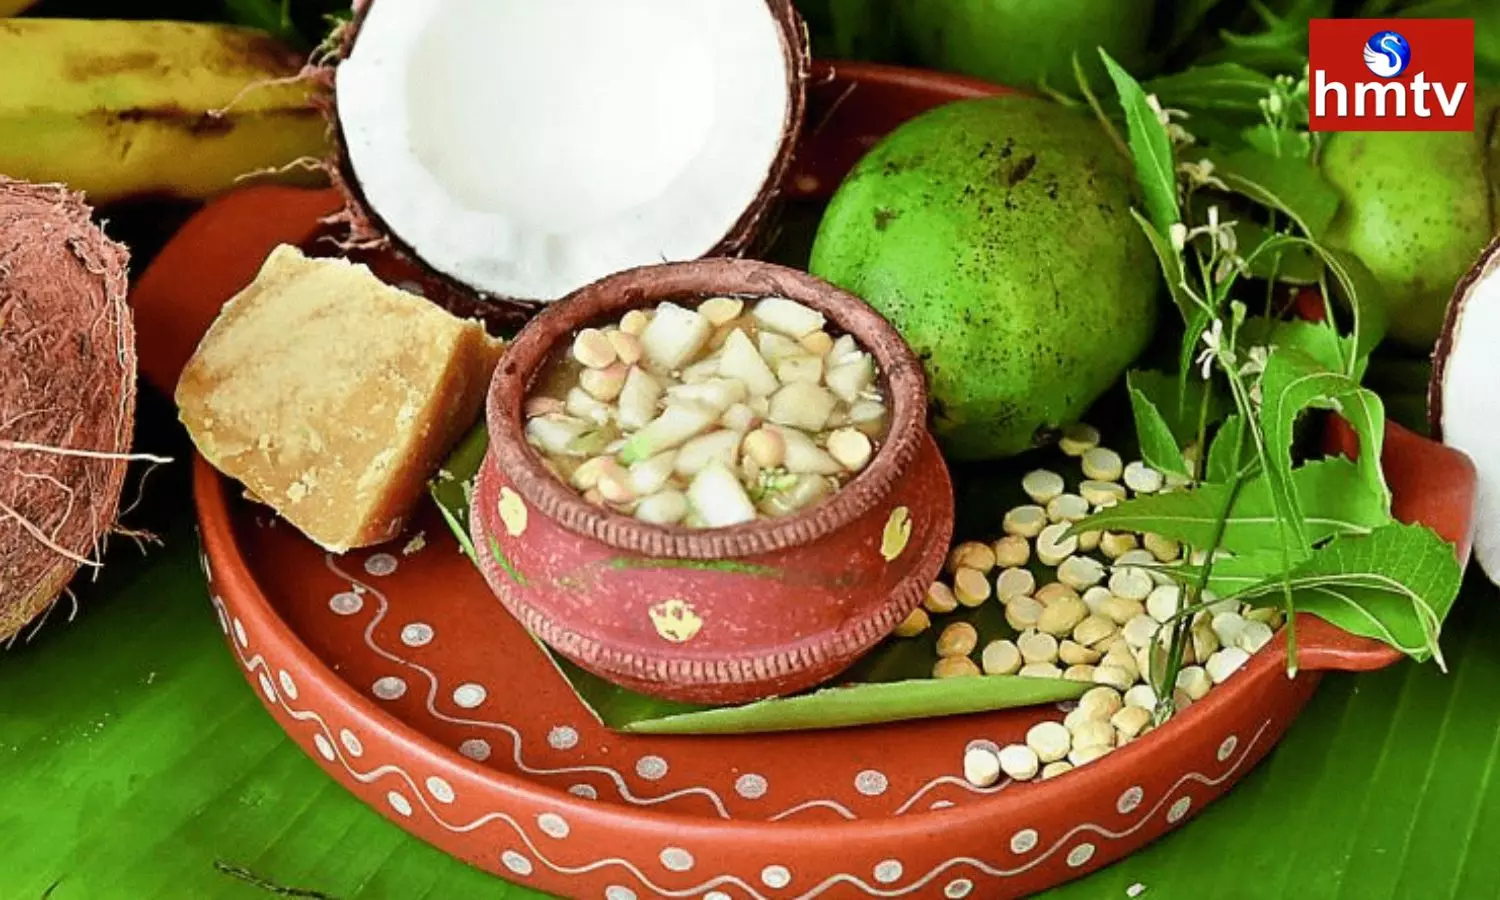 Ugadi Pachadi is a Symbolic Reminder to one and all to be prepared to experience all types of flavors that life